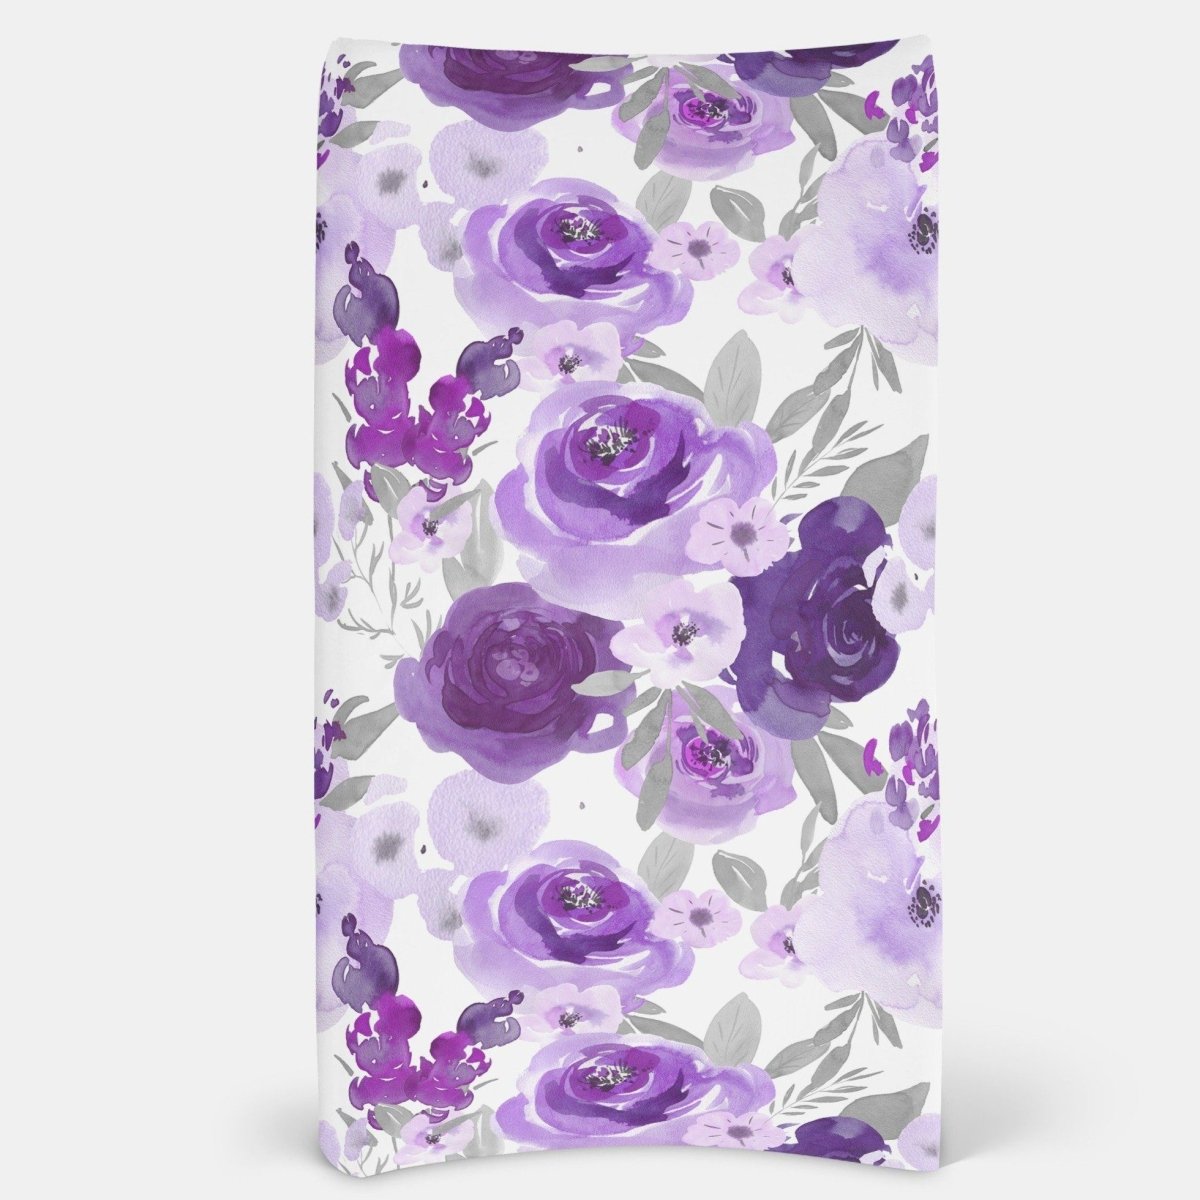 Large Purple Floral Changing Pad Cover - gender_girl, Purple Floral Elephant, Theme_Floral